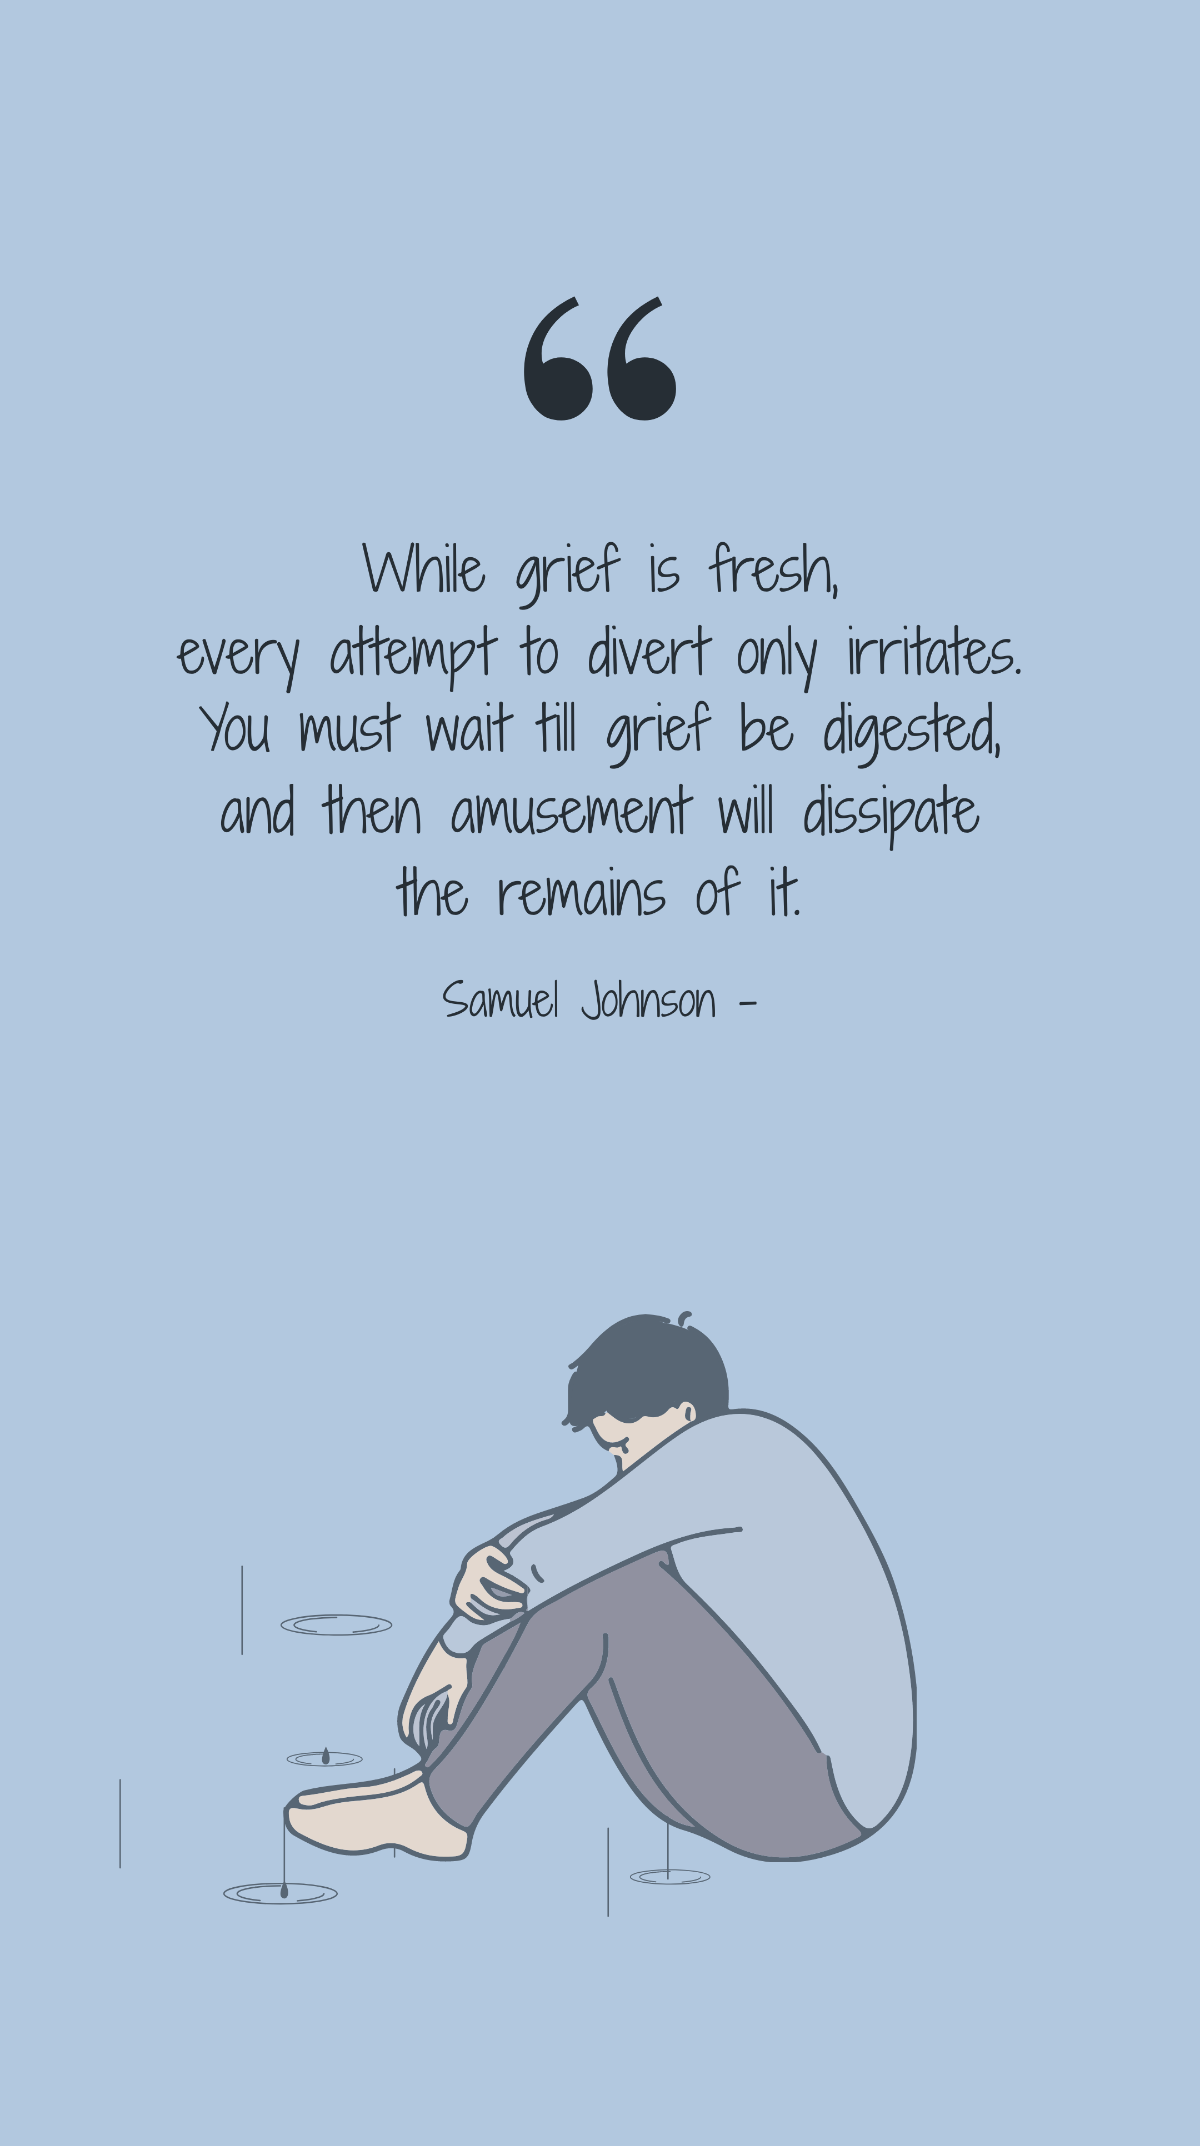 Samuel Johnson - While grief is fresh, every attempt to divert only irritates. You must wait till grief be digested, and then amusement will dissipate the remains of it.